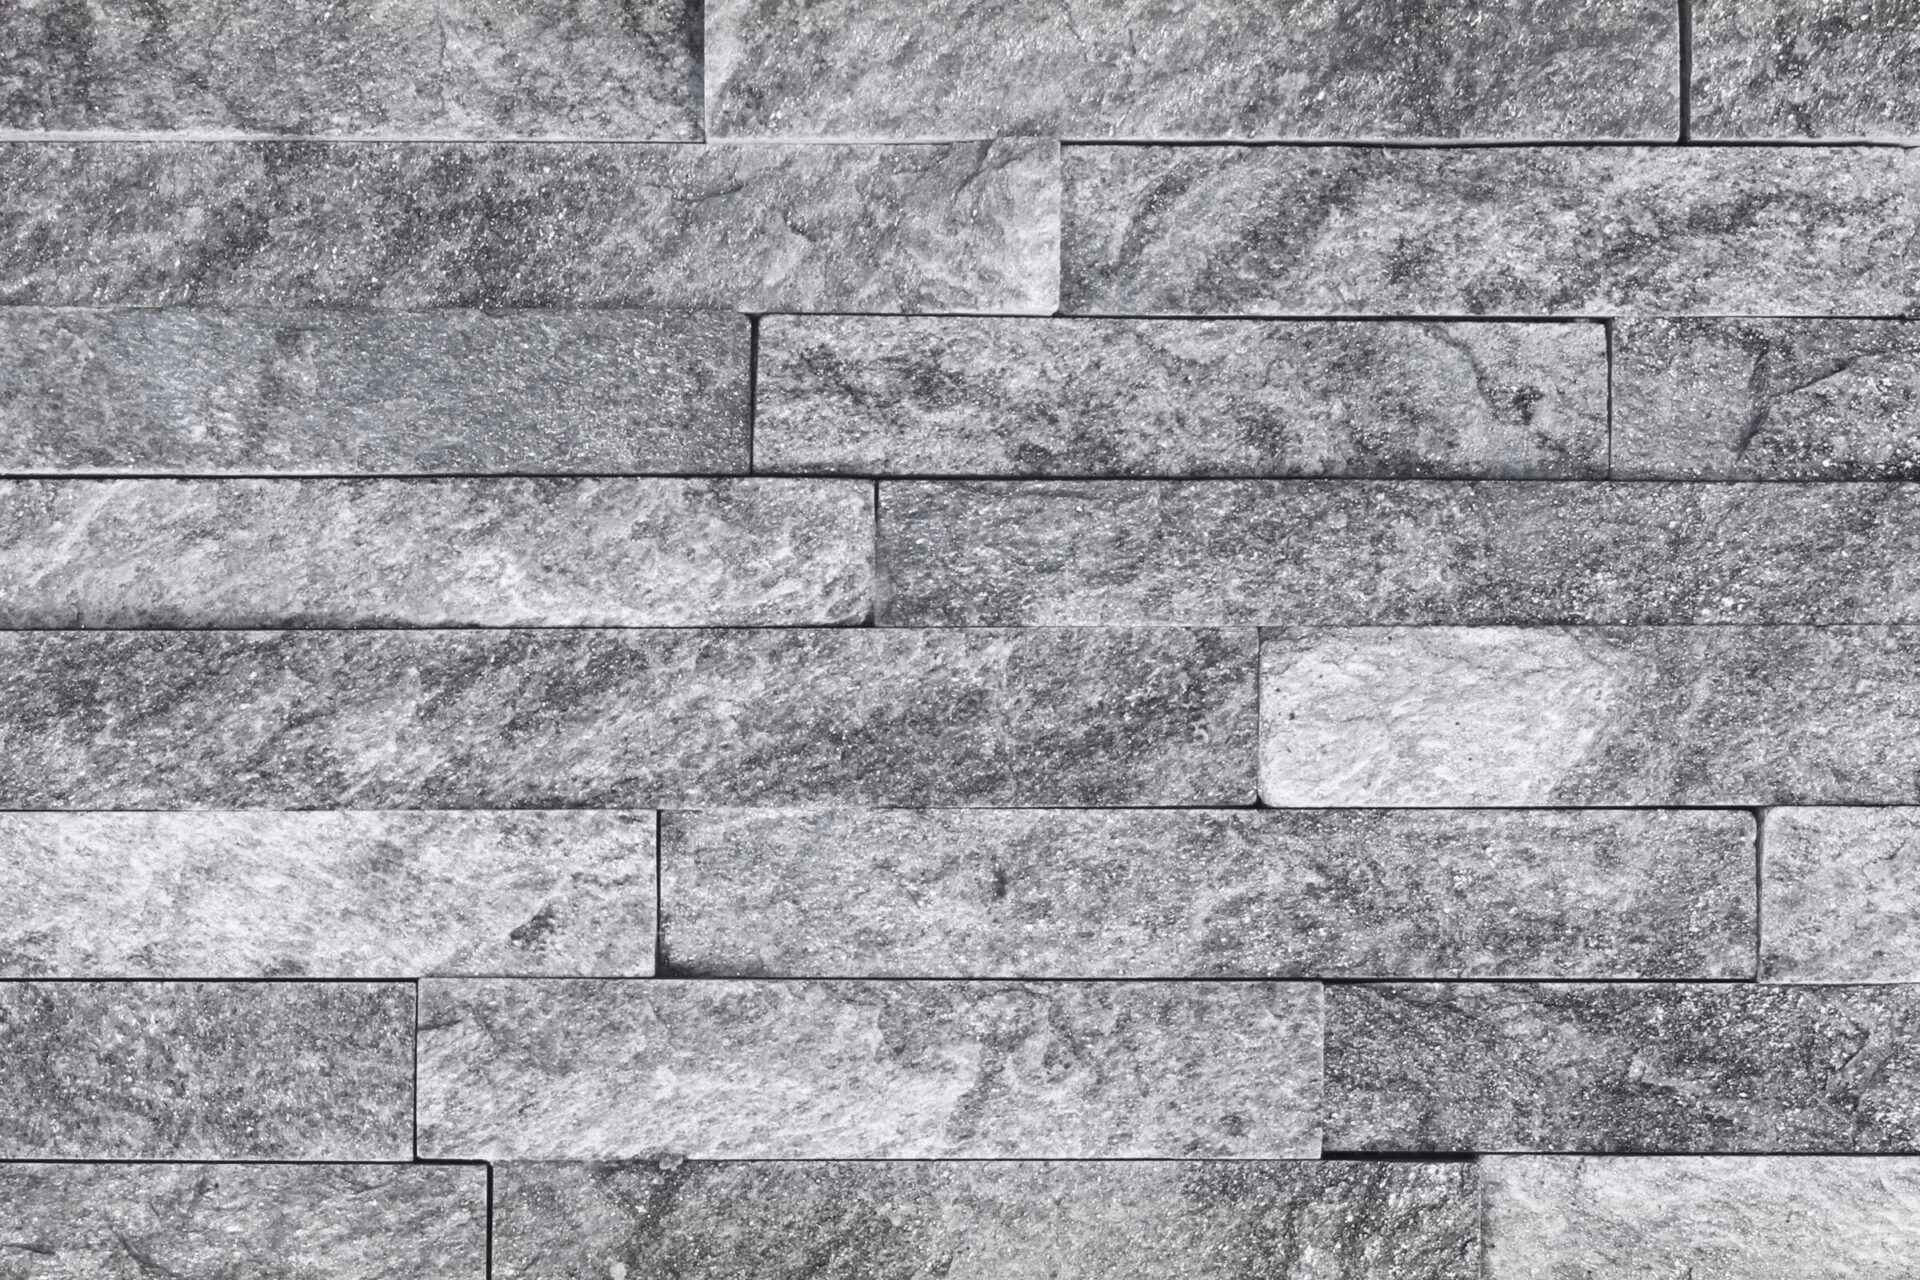 The image shows a wall with a pattern of rectangular gray stone tiles, arranged in an offset brick layout, with a textured surface.